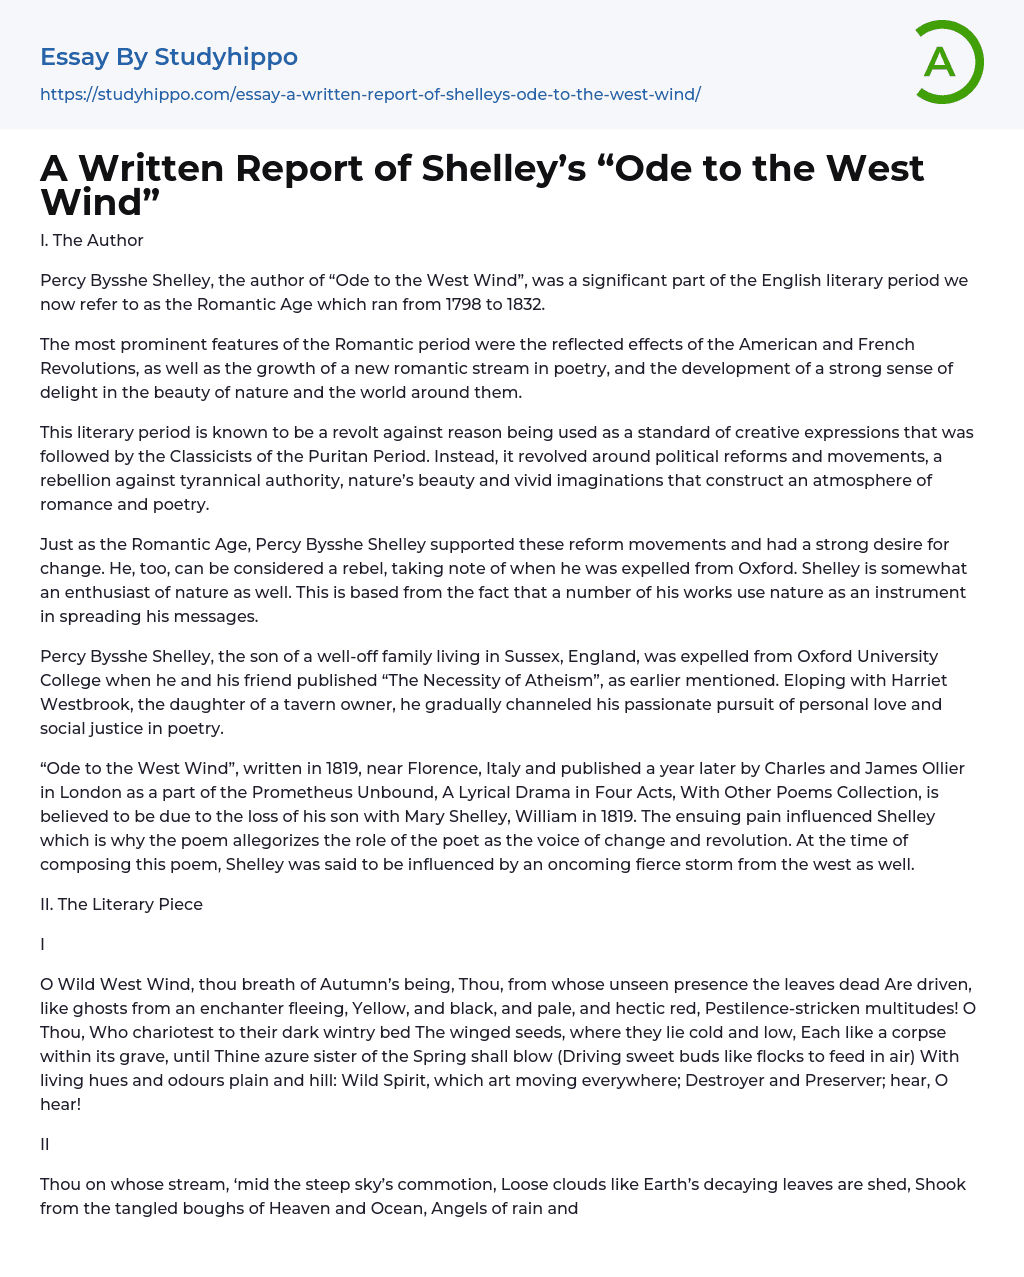 A Written Report of “Ode to the West Wind” Percy Bysshe Shelley Essay Example